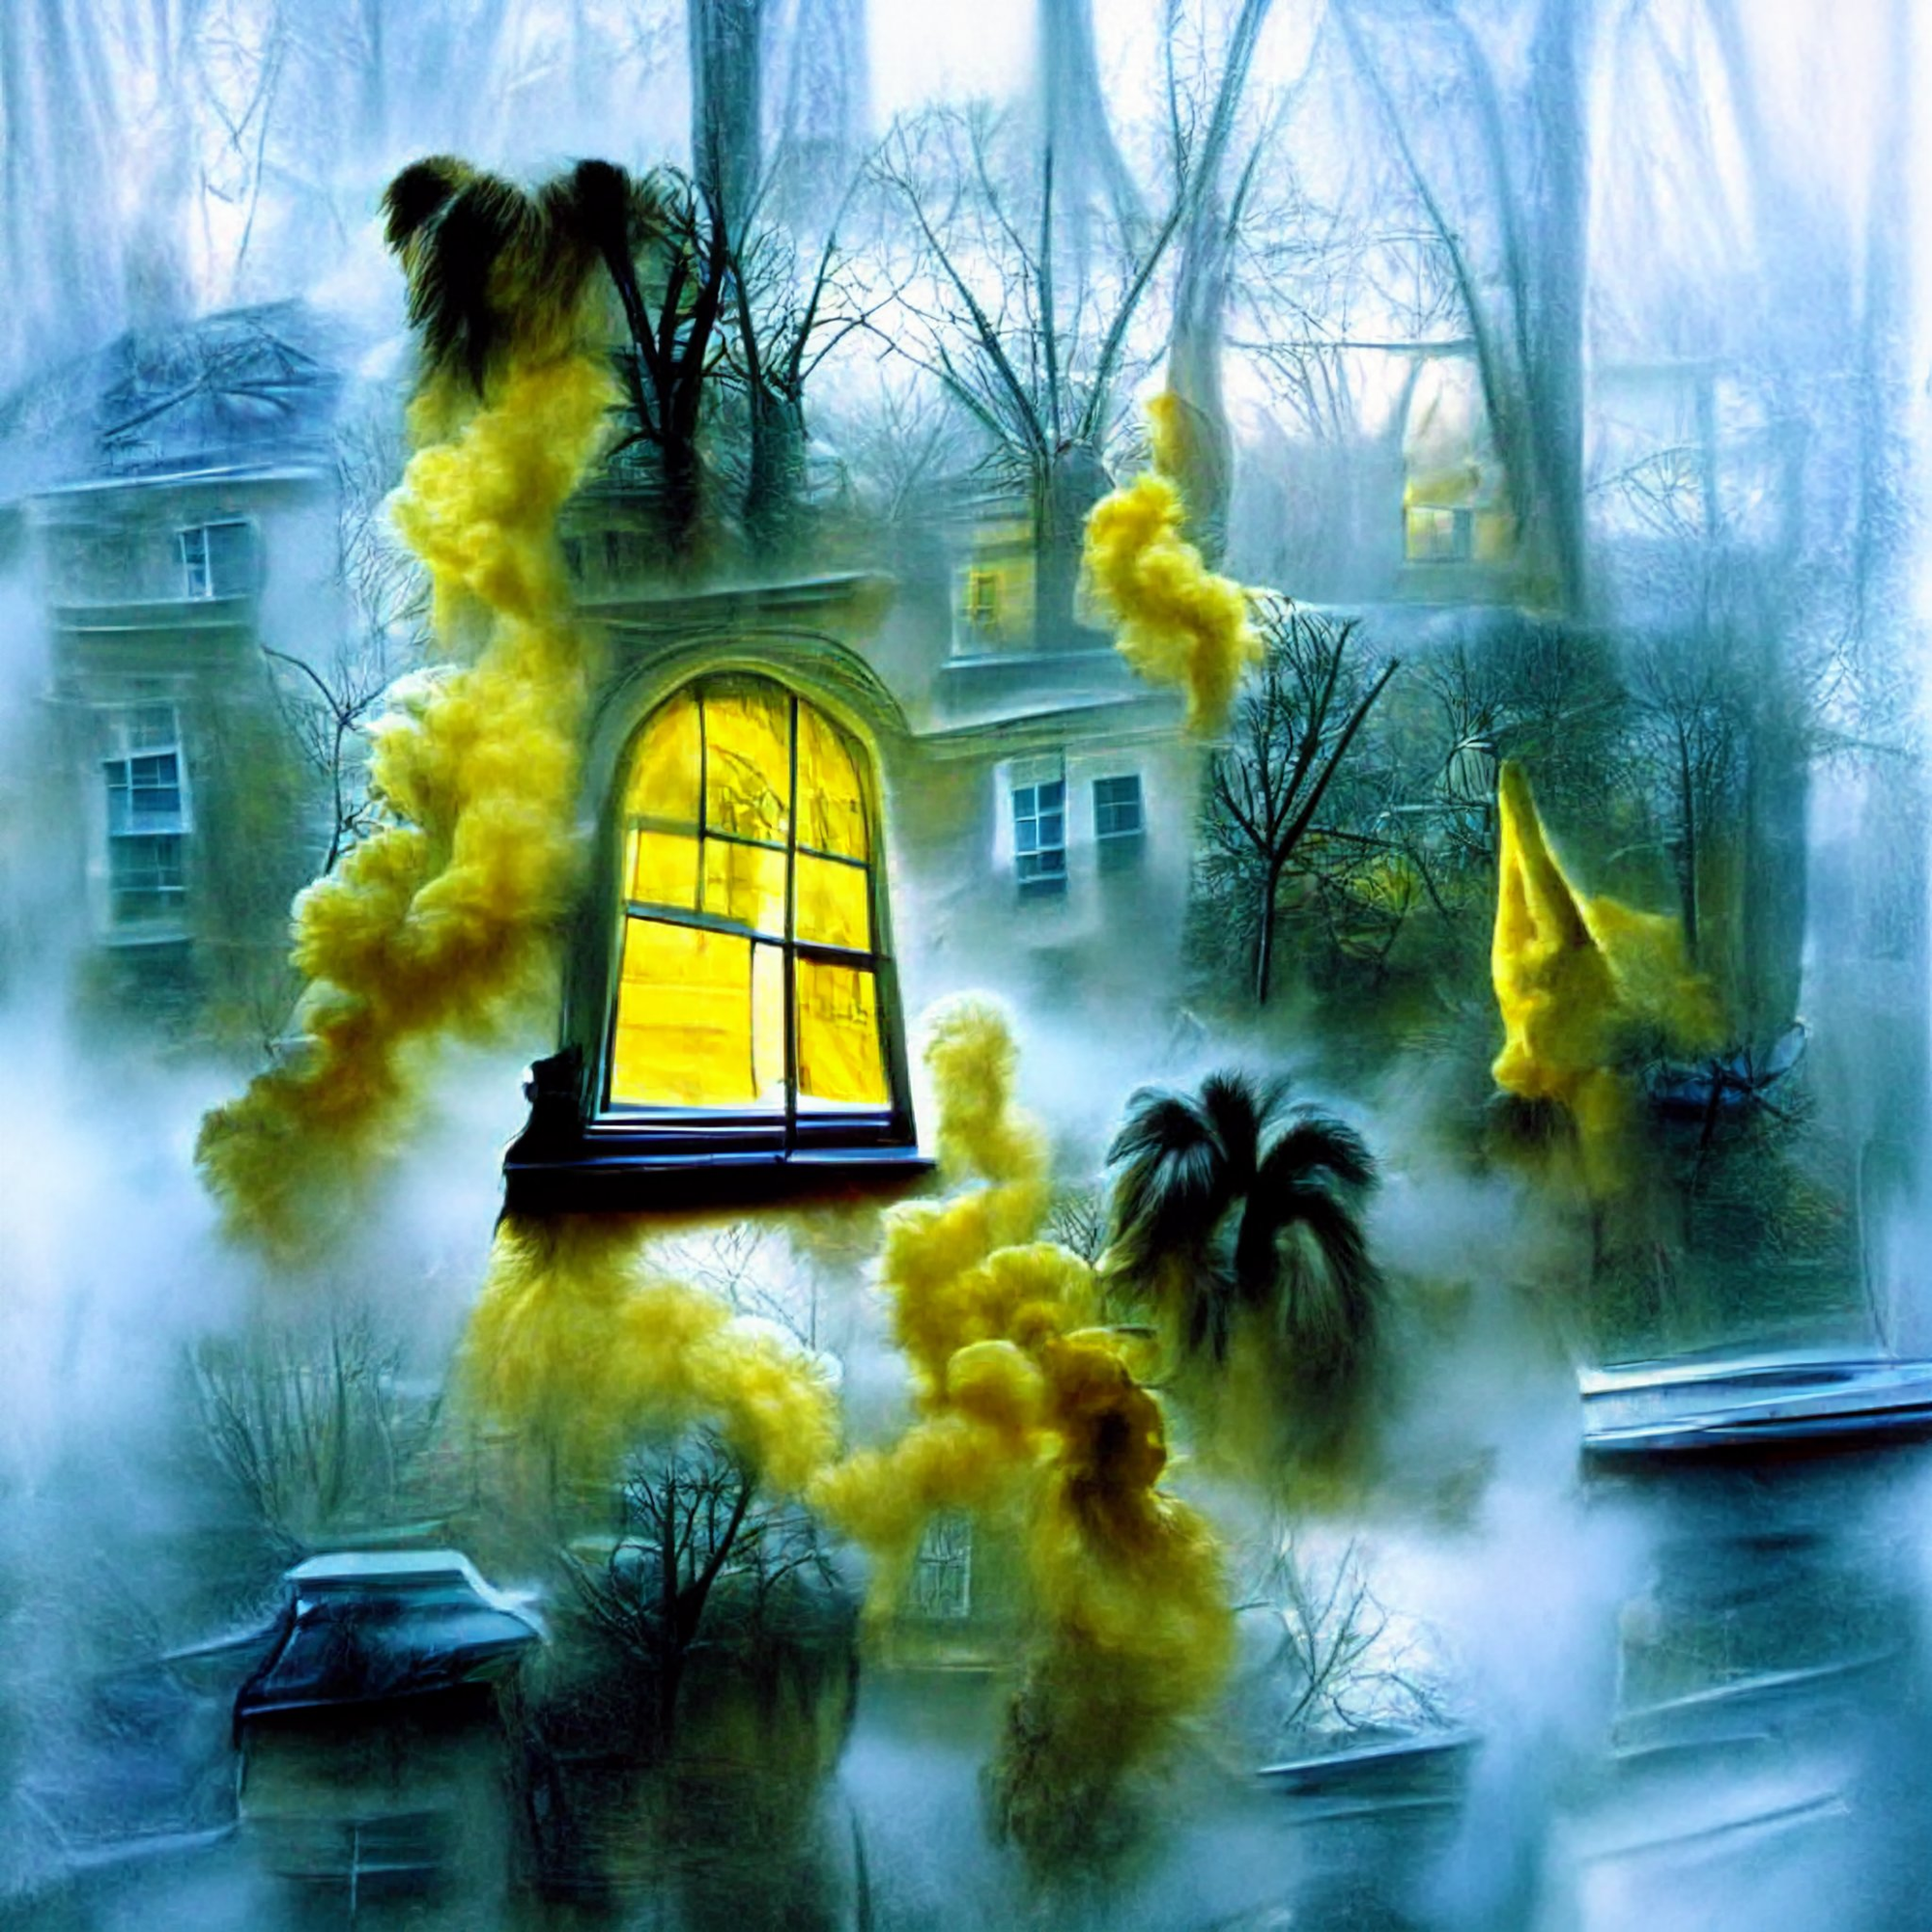 "The Yellow Smoke That Rubs Its Muzzle On The Window-Panes"